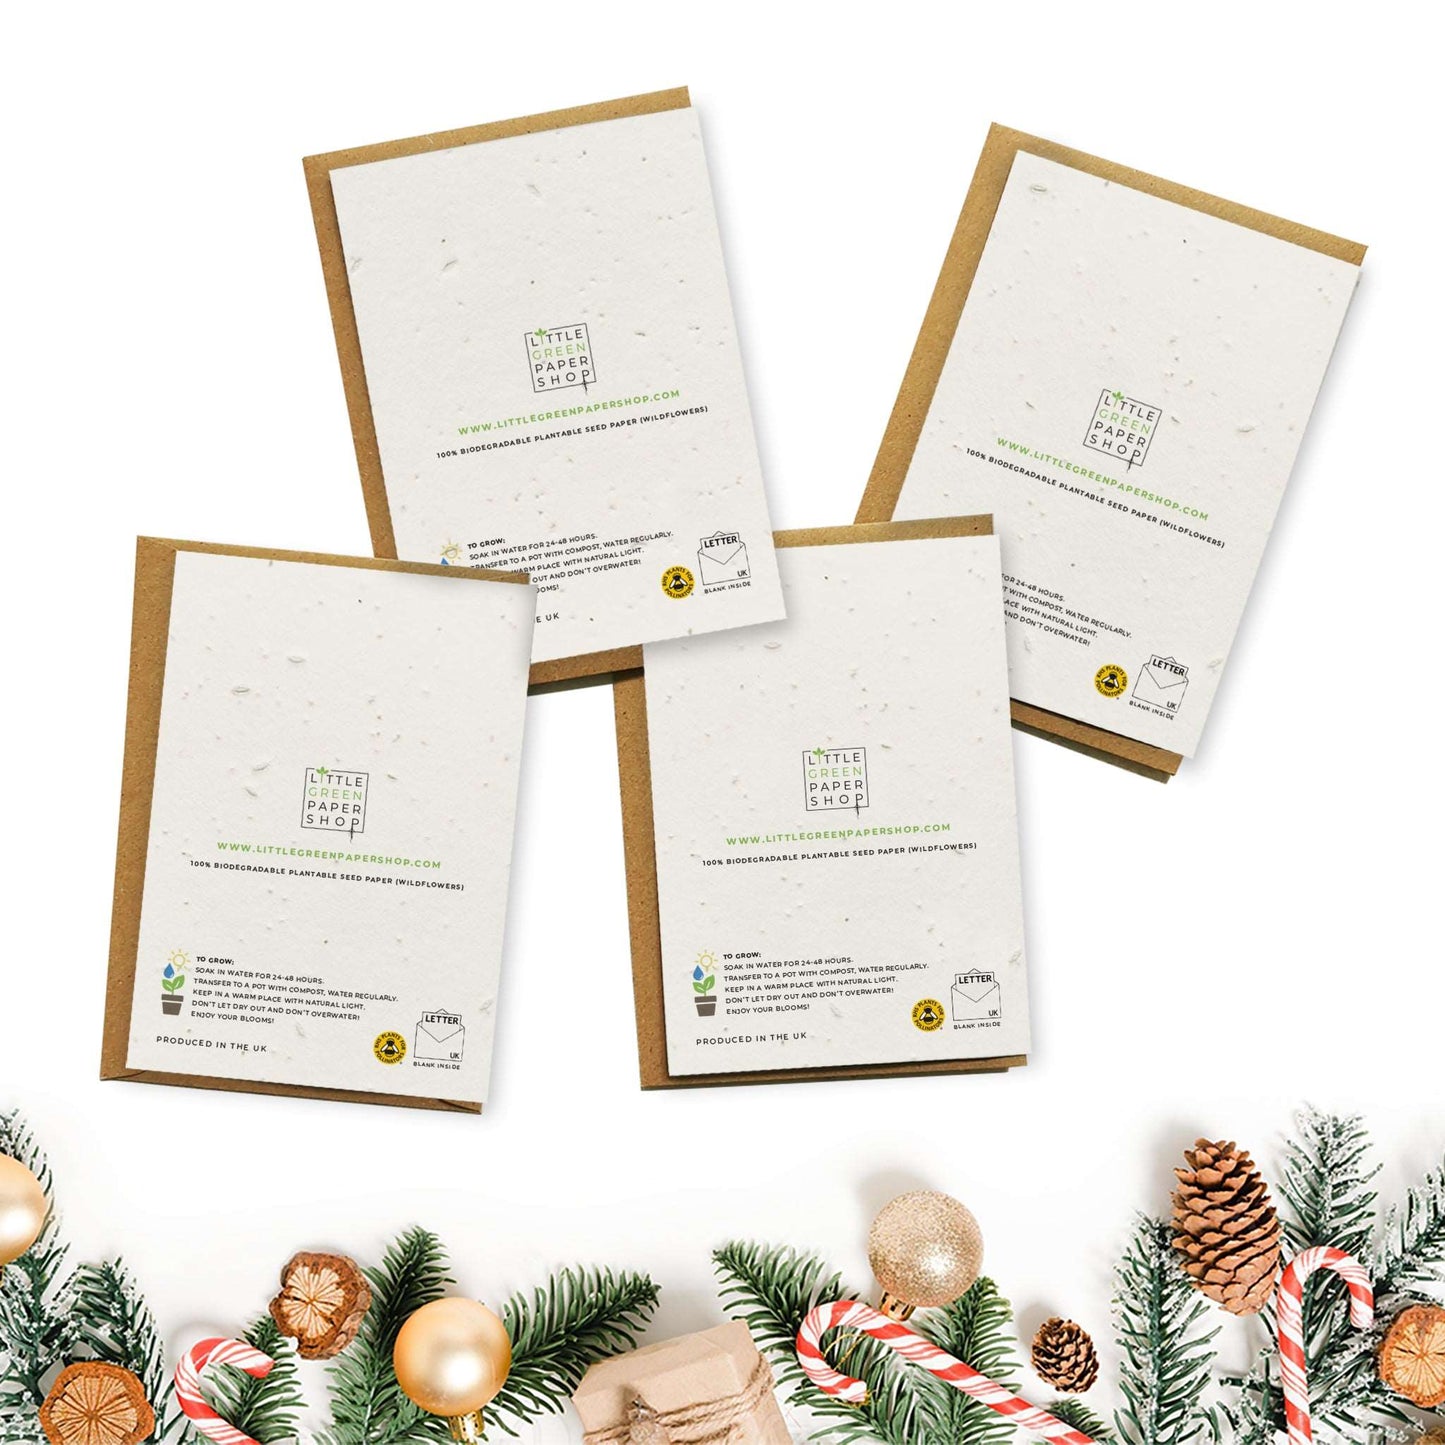 Plantable Seed Paper Christmas Cards 4-Pack - Mistletoe Greeting Card Little Green Paper Shop